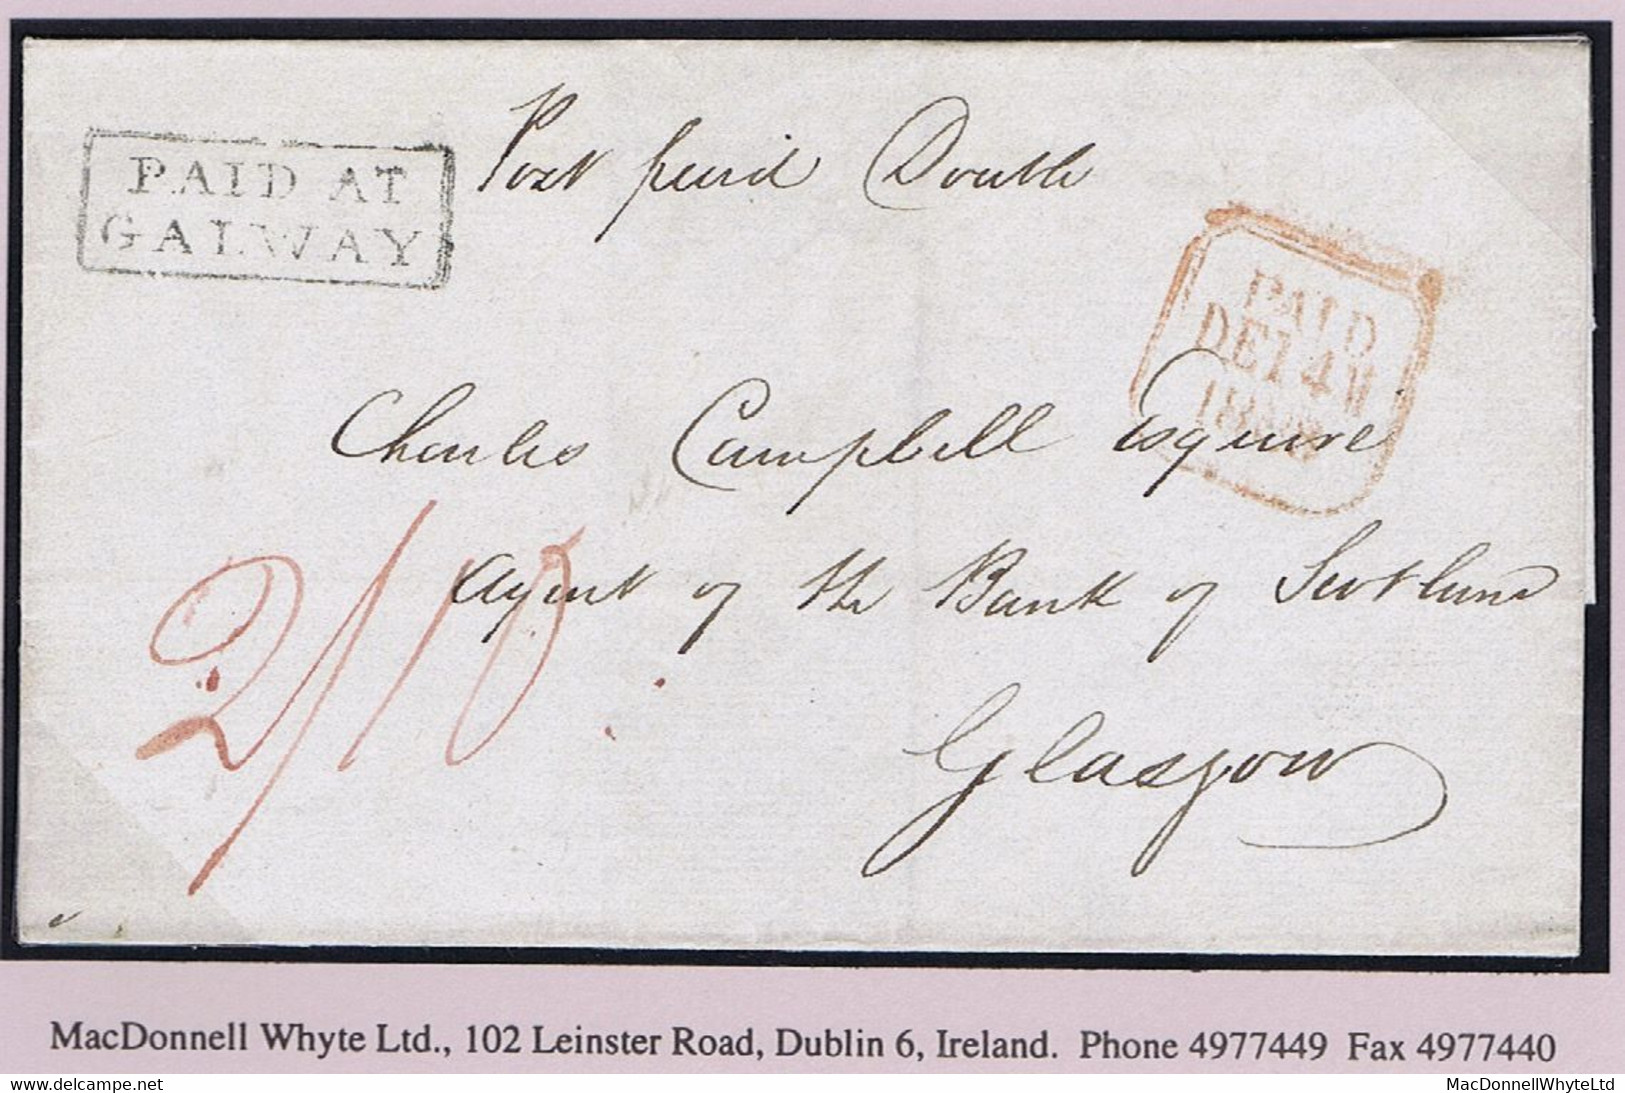 Ireland Galway 1838 Boxed PAID AT/GALWAY Clear In Black On Cover To Glasgow Prepaid "2/10" Double Rate - Préphilatélie